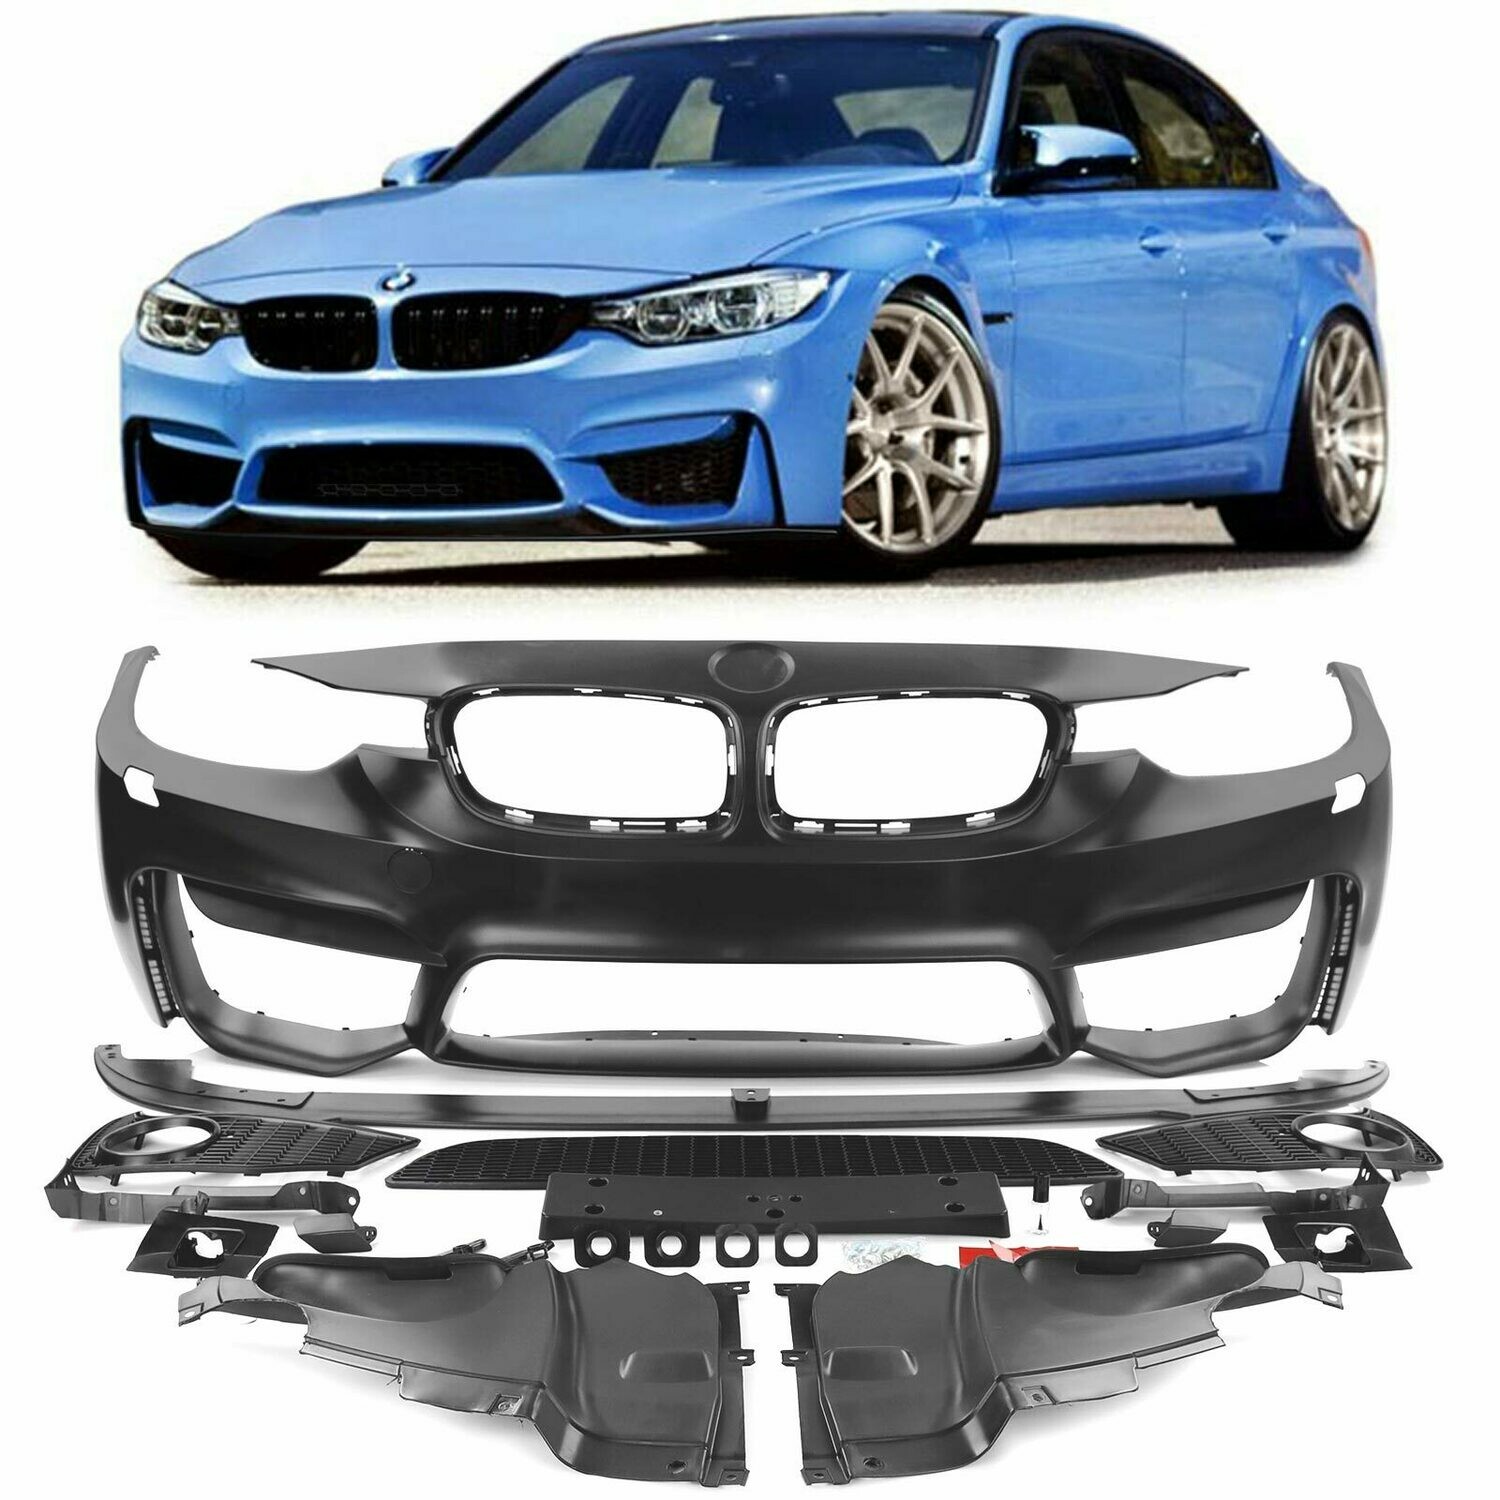 Pare choc avant BMW F30 F31 Look Pack M Performance Phase 1 2011 - 2015